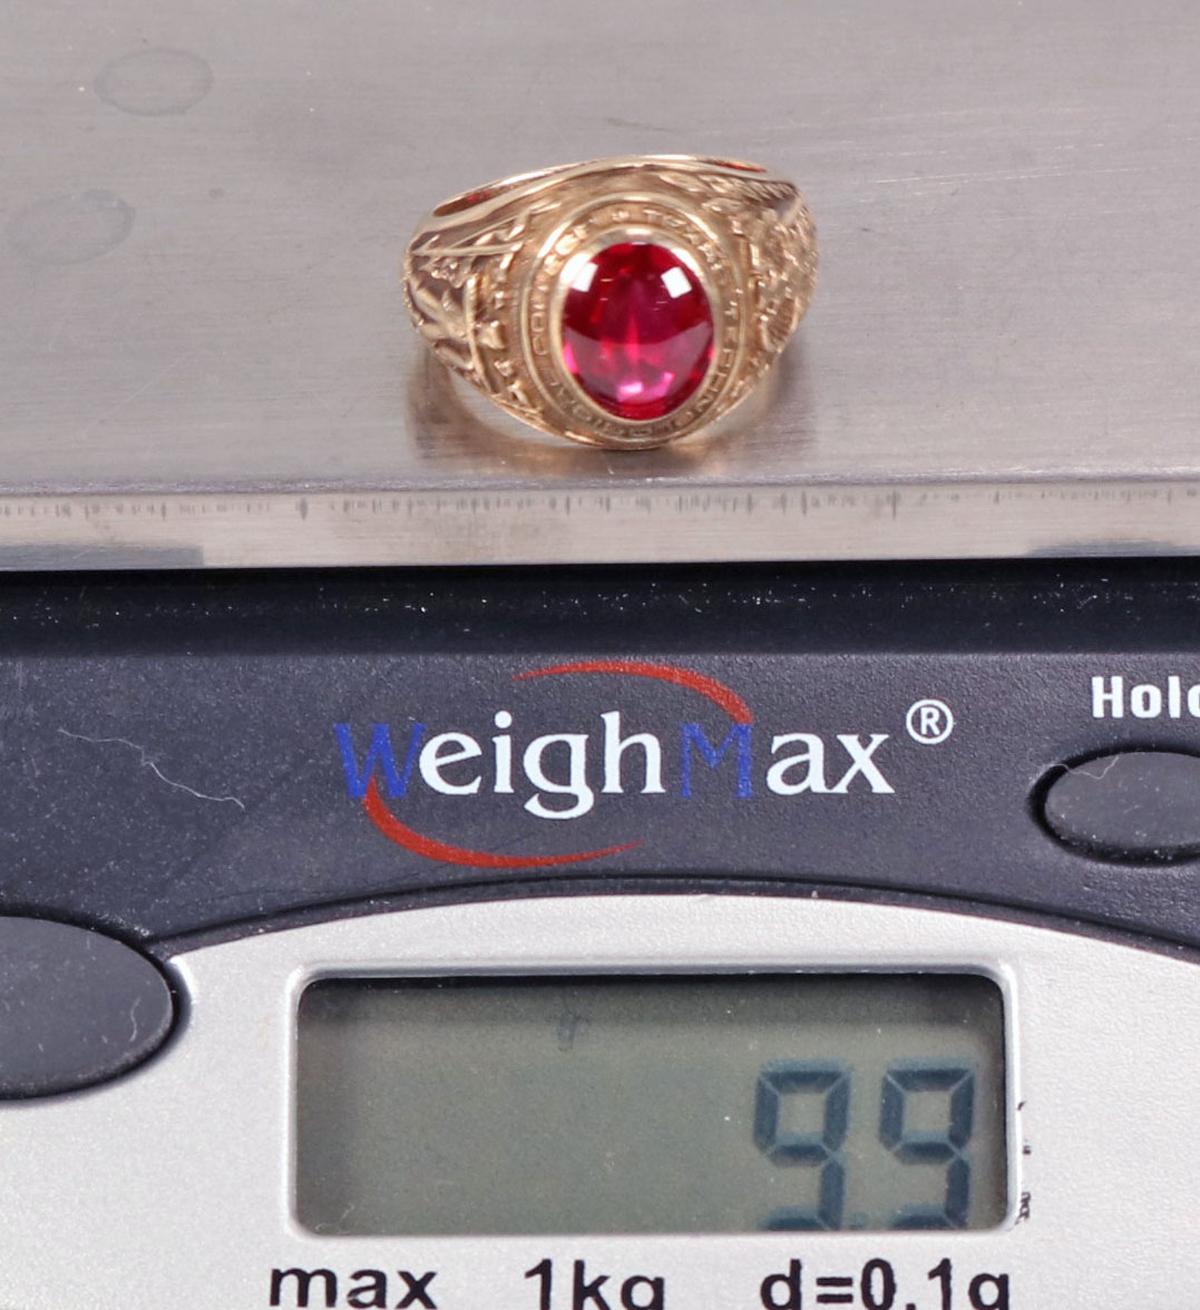 10k Gold Texas College Class Ring w/ Red Stone, Sz. 7.25, 9.9 Grams